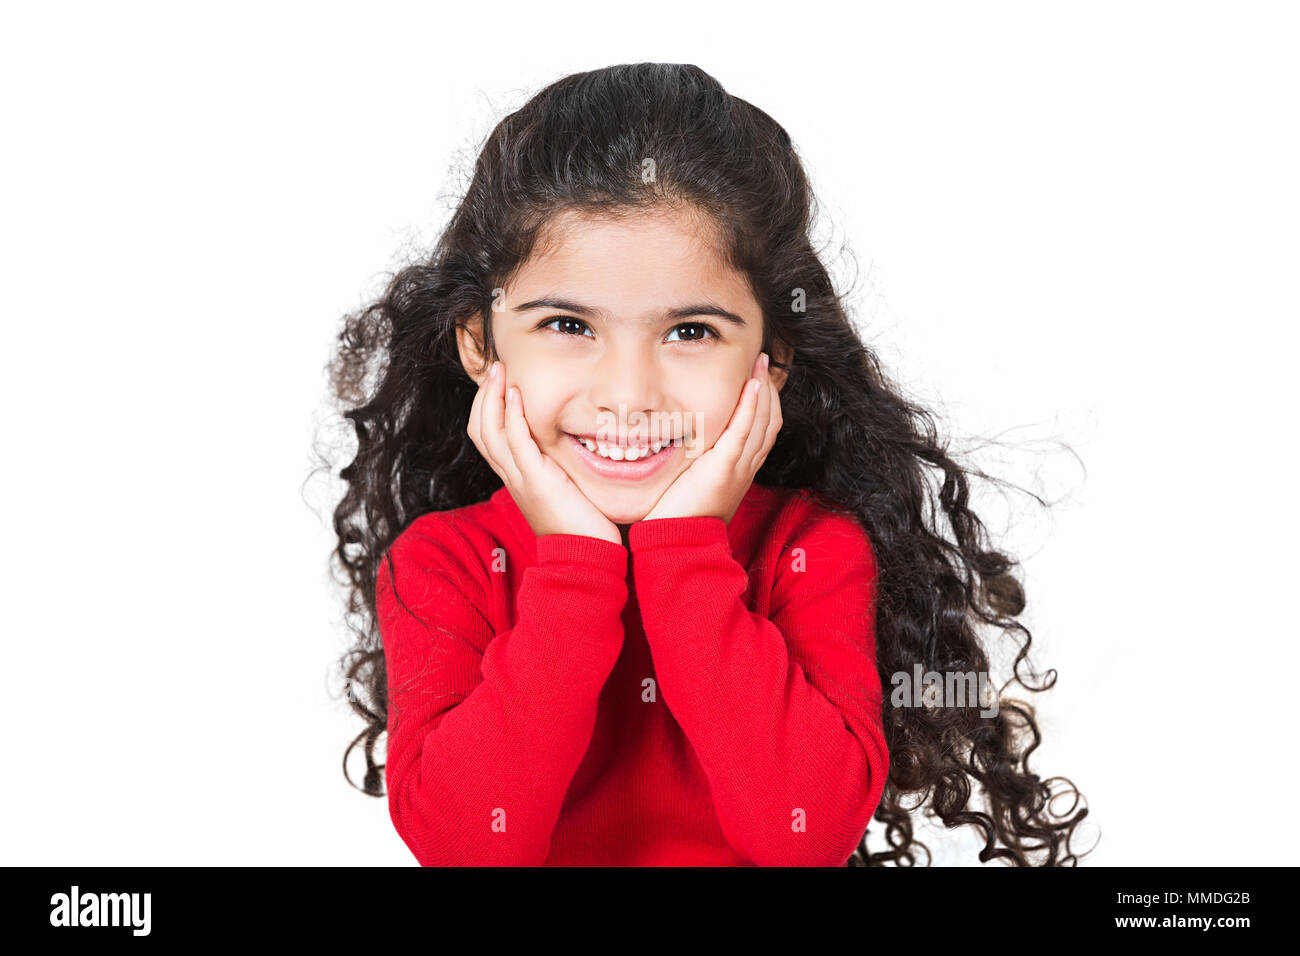 Smiling One Kid Girl Leaning Hand On Chin Looking-Away Enjoying Stock Photo